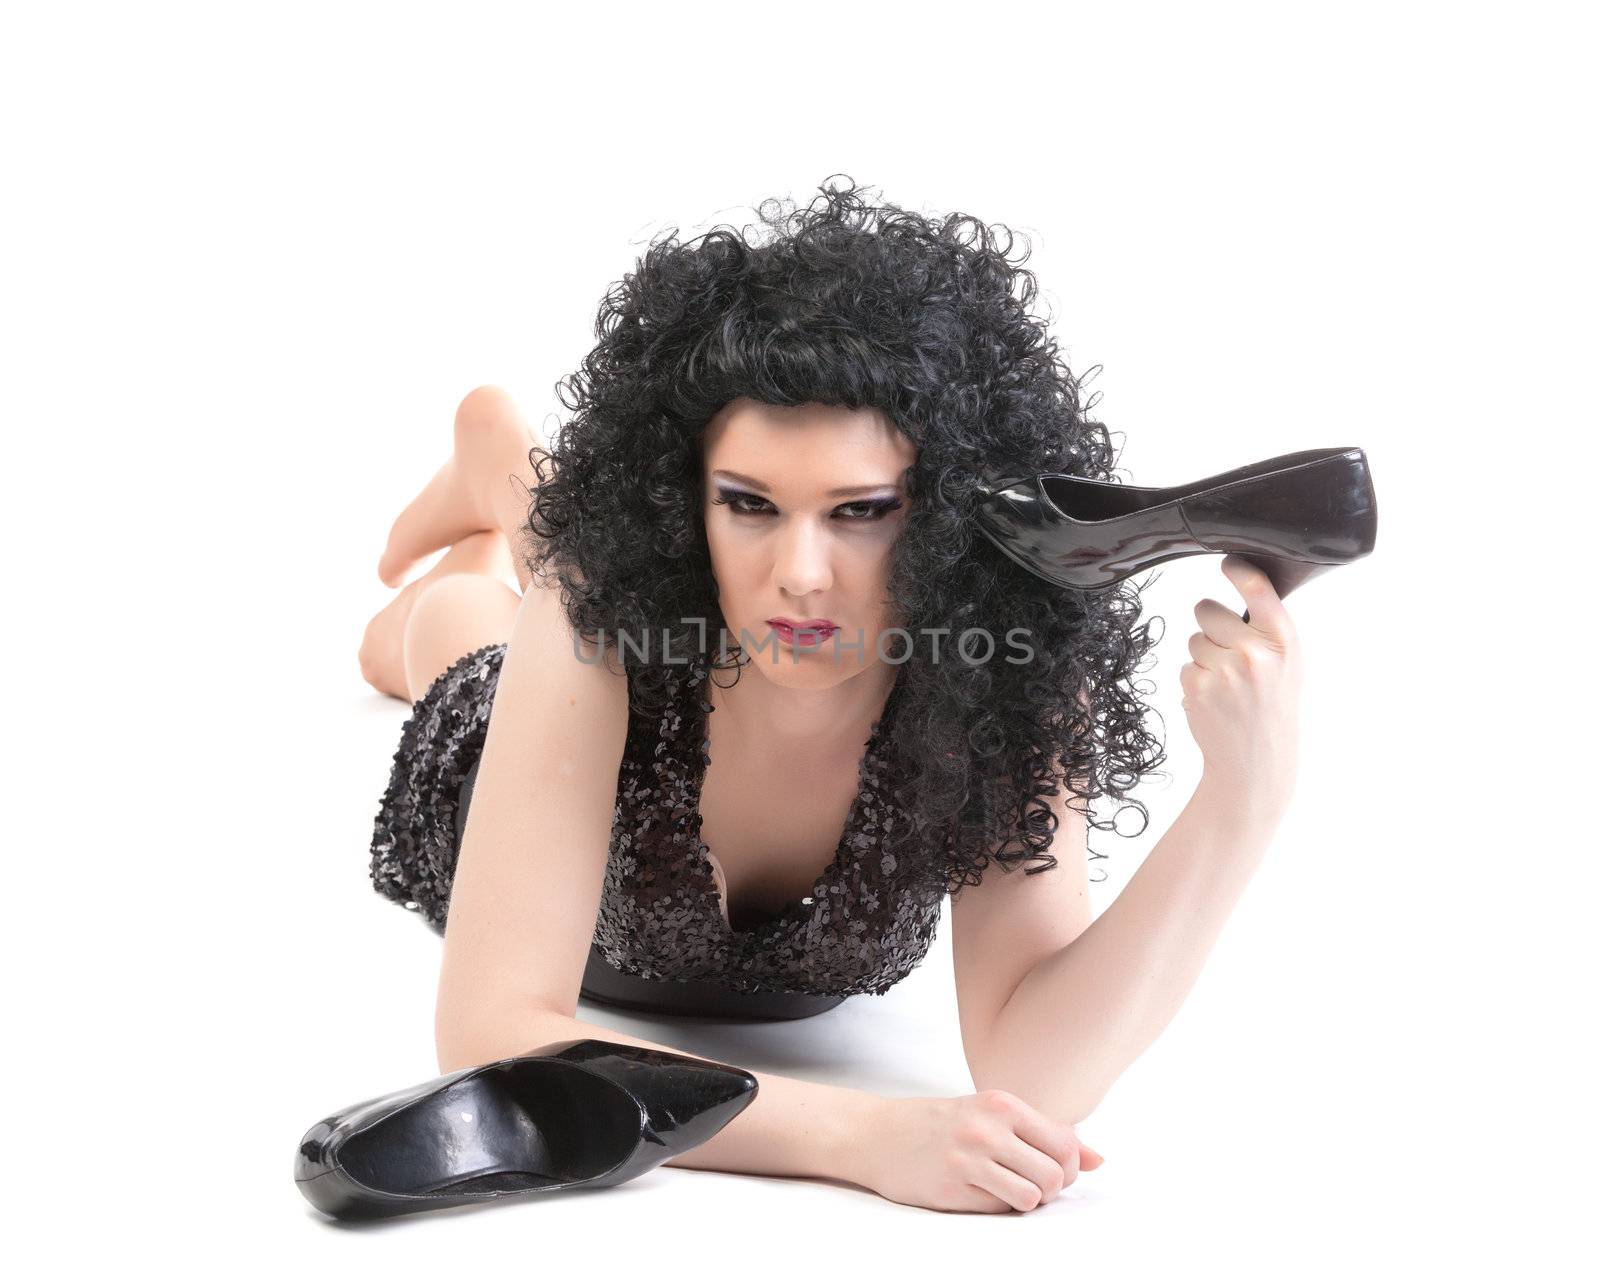 Portrait of drag queen lying on floor by Discovod